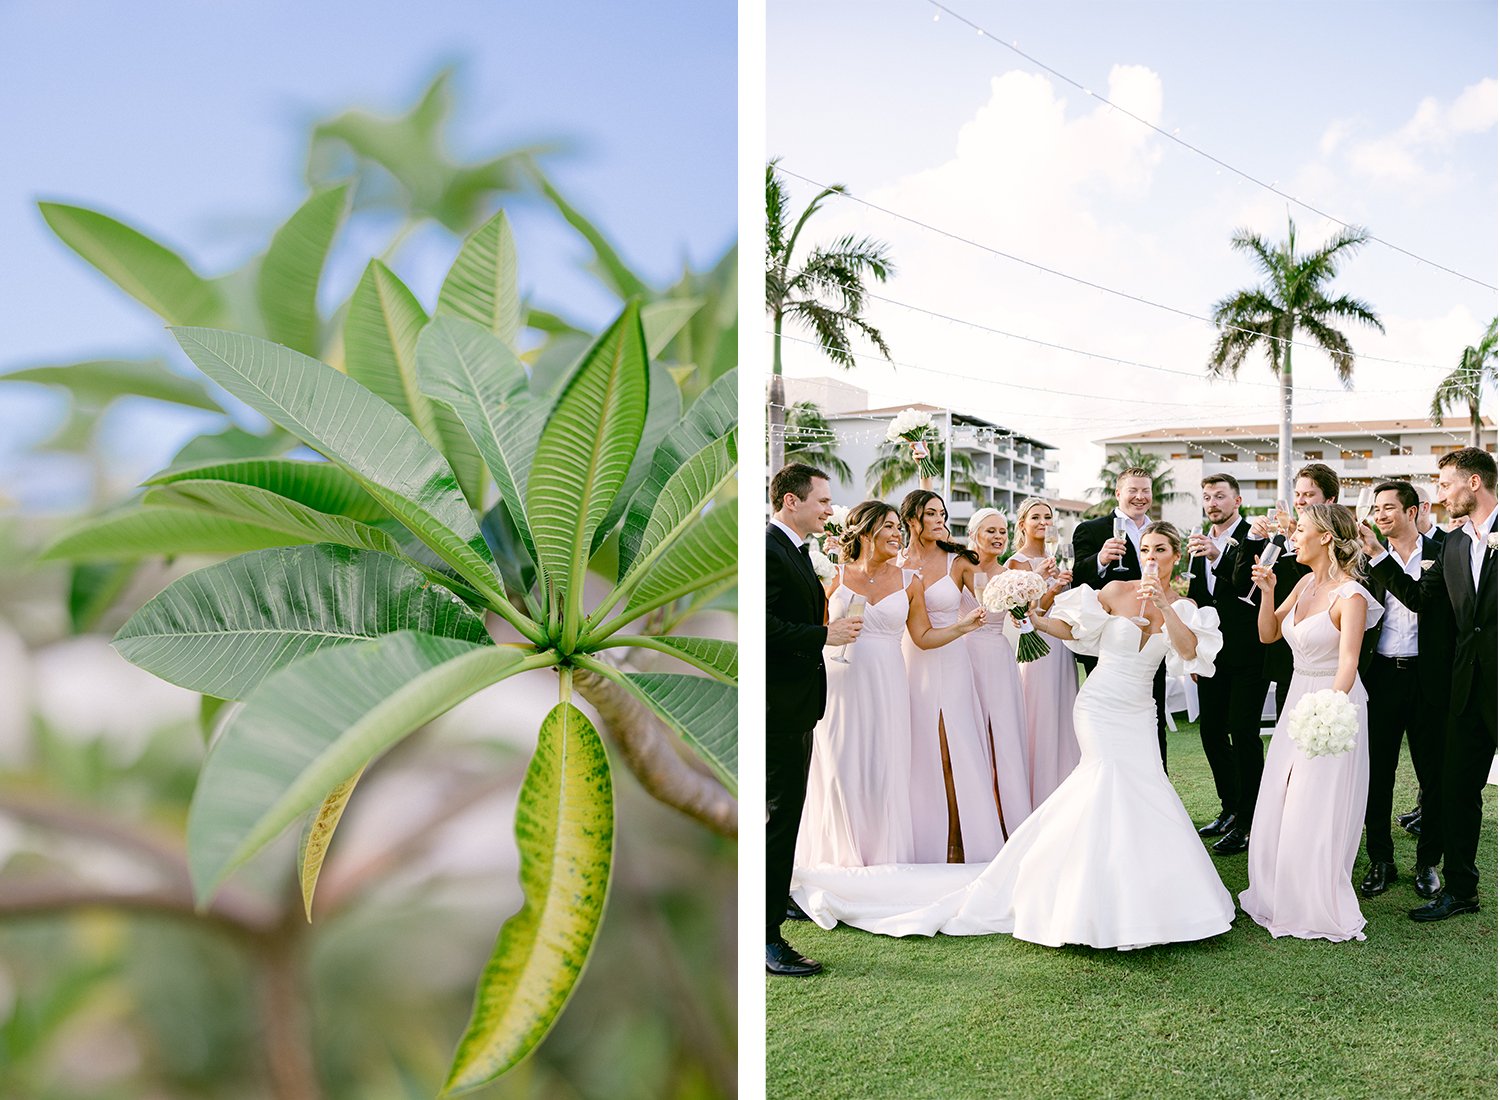 35 detail photo of tropical leaves next to wedding ceremony and lovely photo os bride and groom celebrating with groomsmen and bridesmaids drinking champagne at Dreams Riviera Cancun.JPG